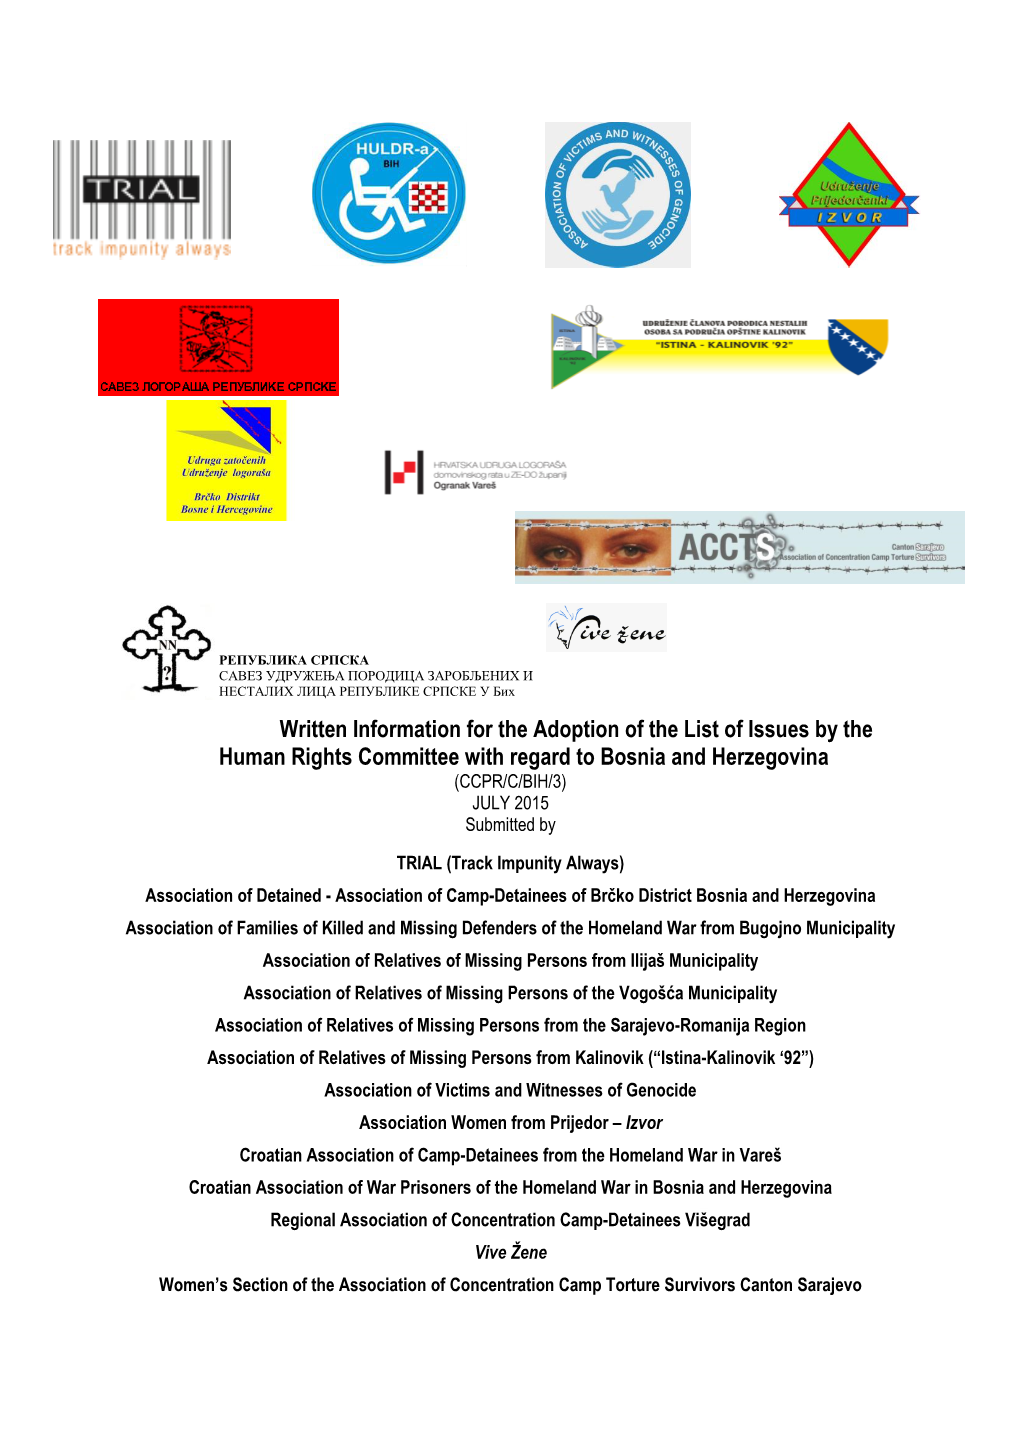 Written Information for the Adoption of the List of Issues by the Human Rights Committee with Regard to Bosnia and Herzegovina (CCPR/C/BIH/3) JULY 2015 Submitted By